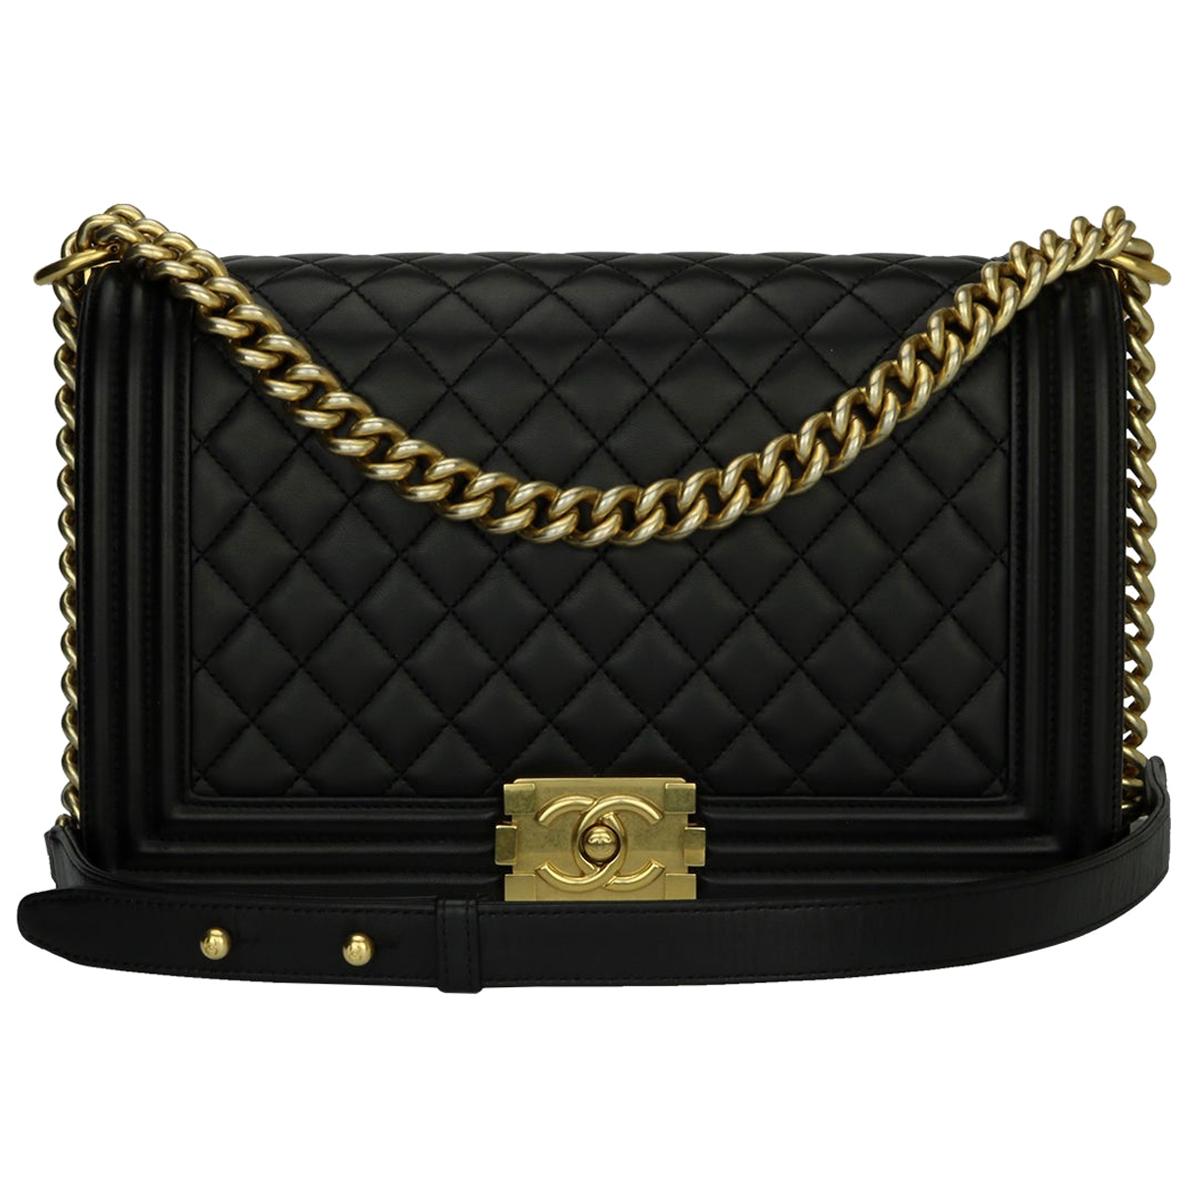 CHANEL New Medium Quilted Boy Bag Black Lambskin with Brushed Gold Hardware 2015